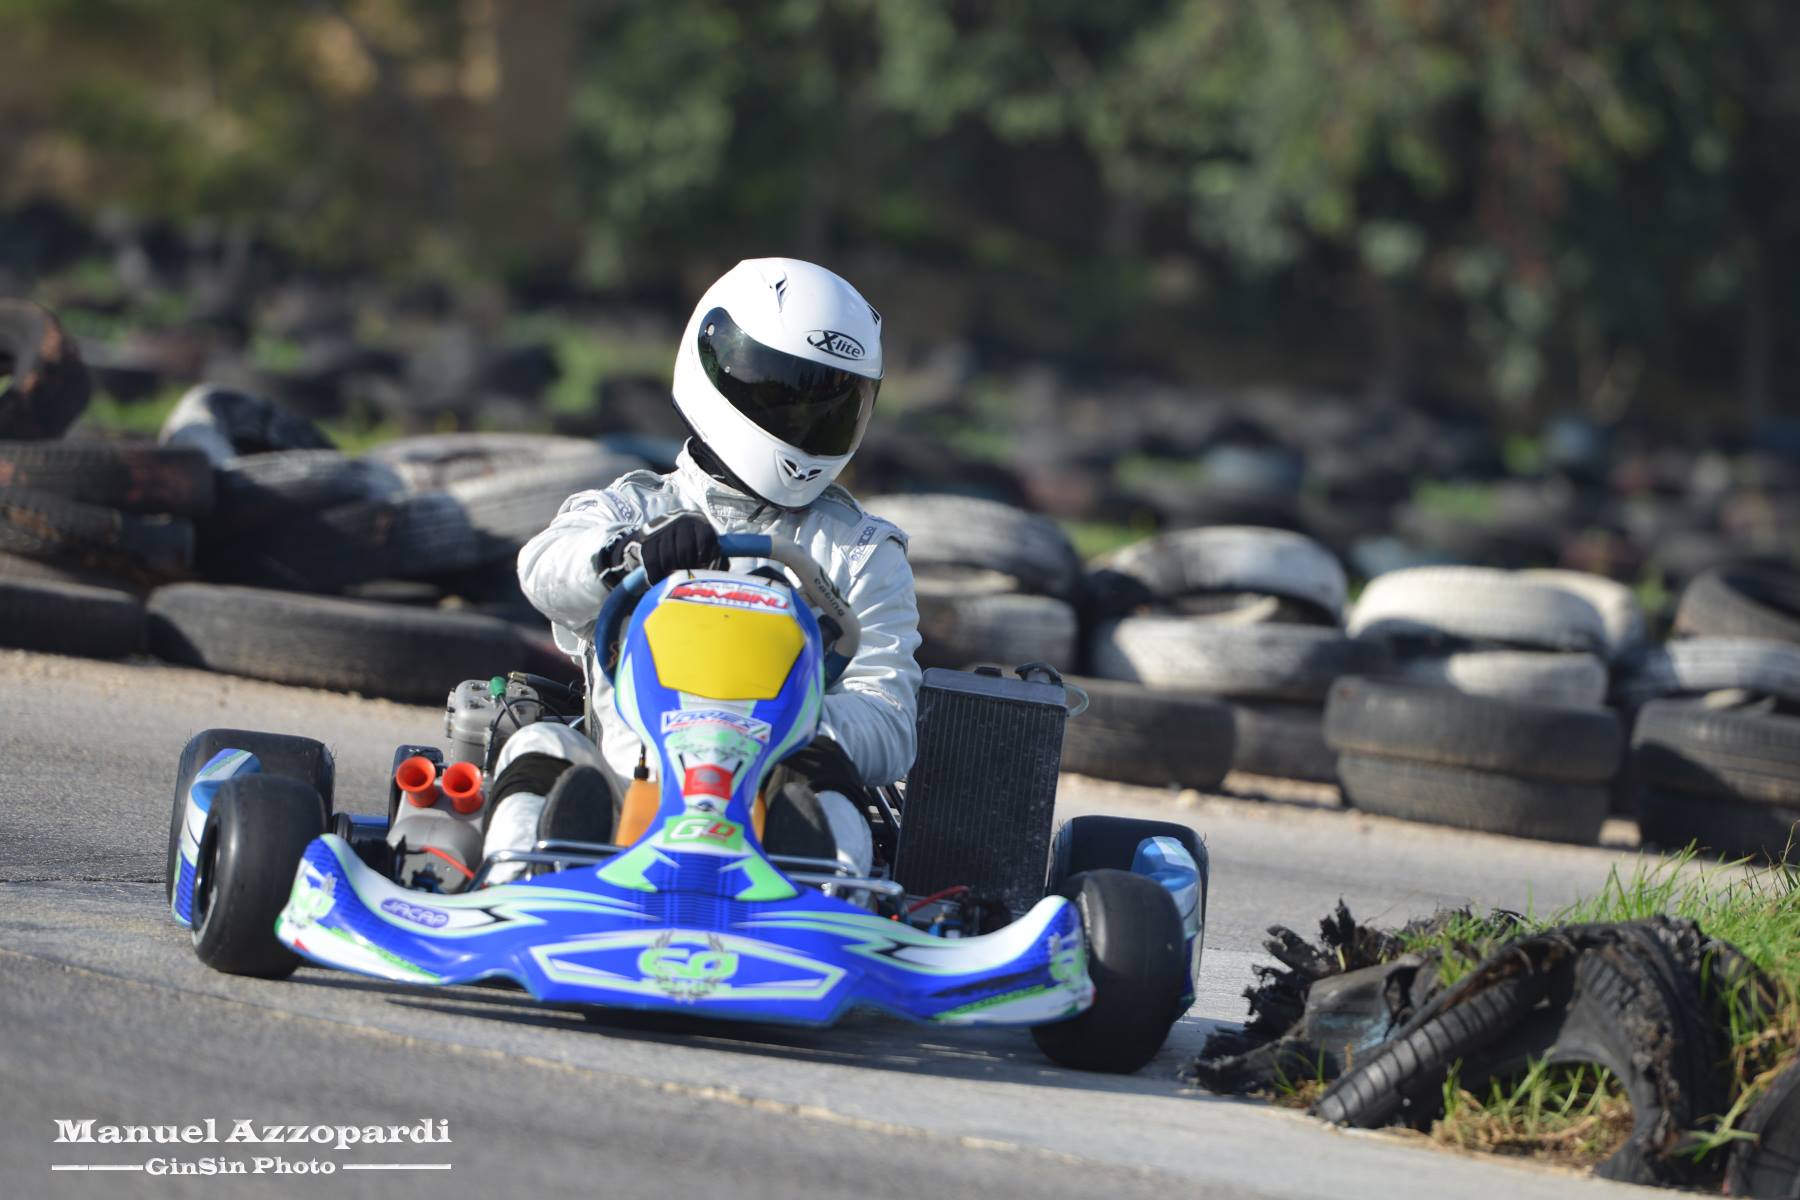 Karting: Zammit and Camilleri win their class, while Agius finishes 3rd in Sicily